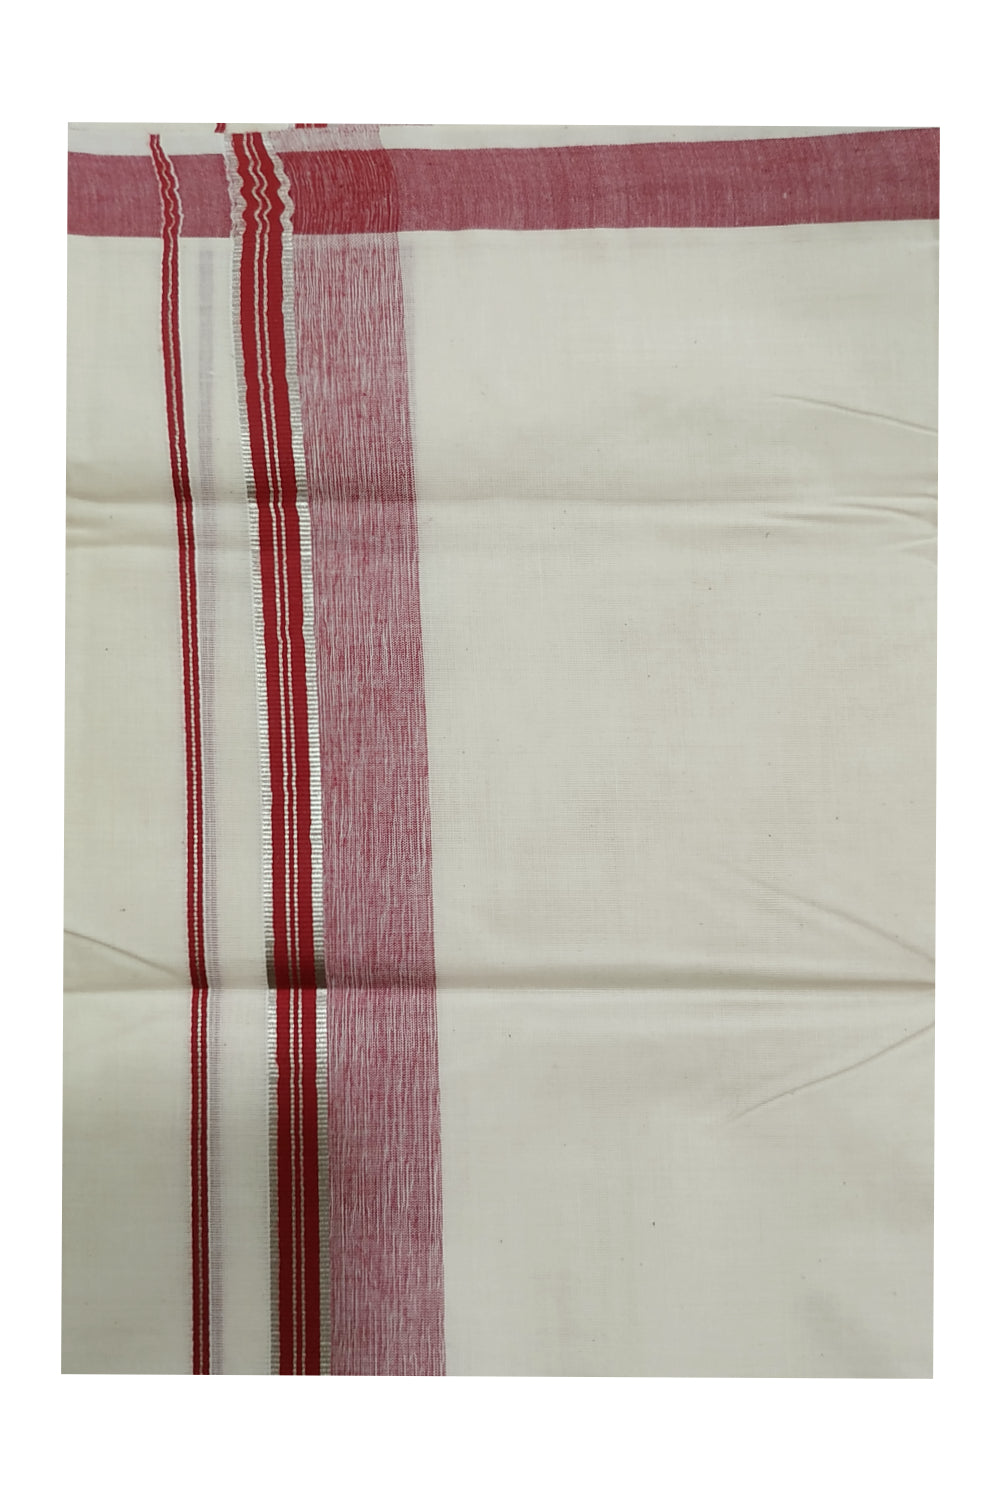 Off White Pure Cotton Mundu with Silver Kasavu and Maroon Border (South Indian Dhoti)